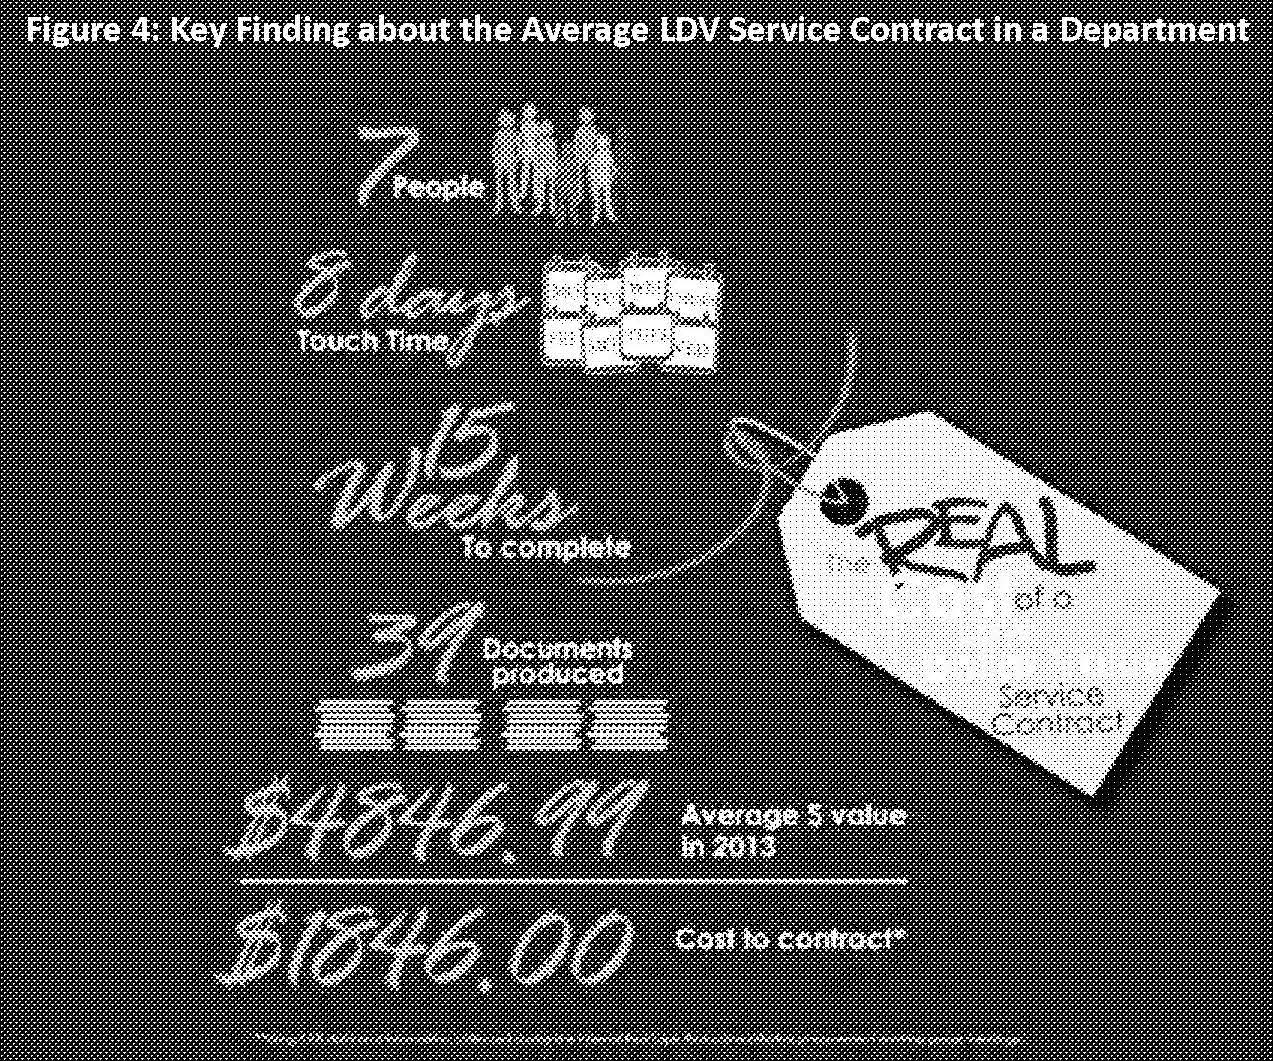 A chart of the key findings for an Average LDV service contract: 7 people, 8 days touch time, 15 weeks to complete, and 39 documents produced. The average contract $ value is $4846.99 and the cost to contract is $1846.00.